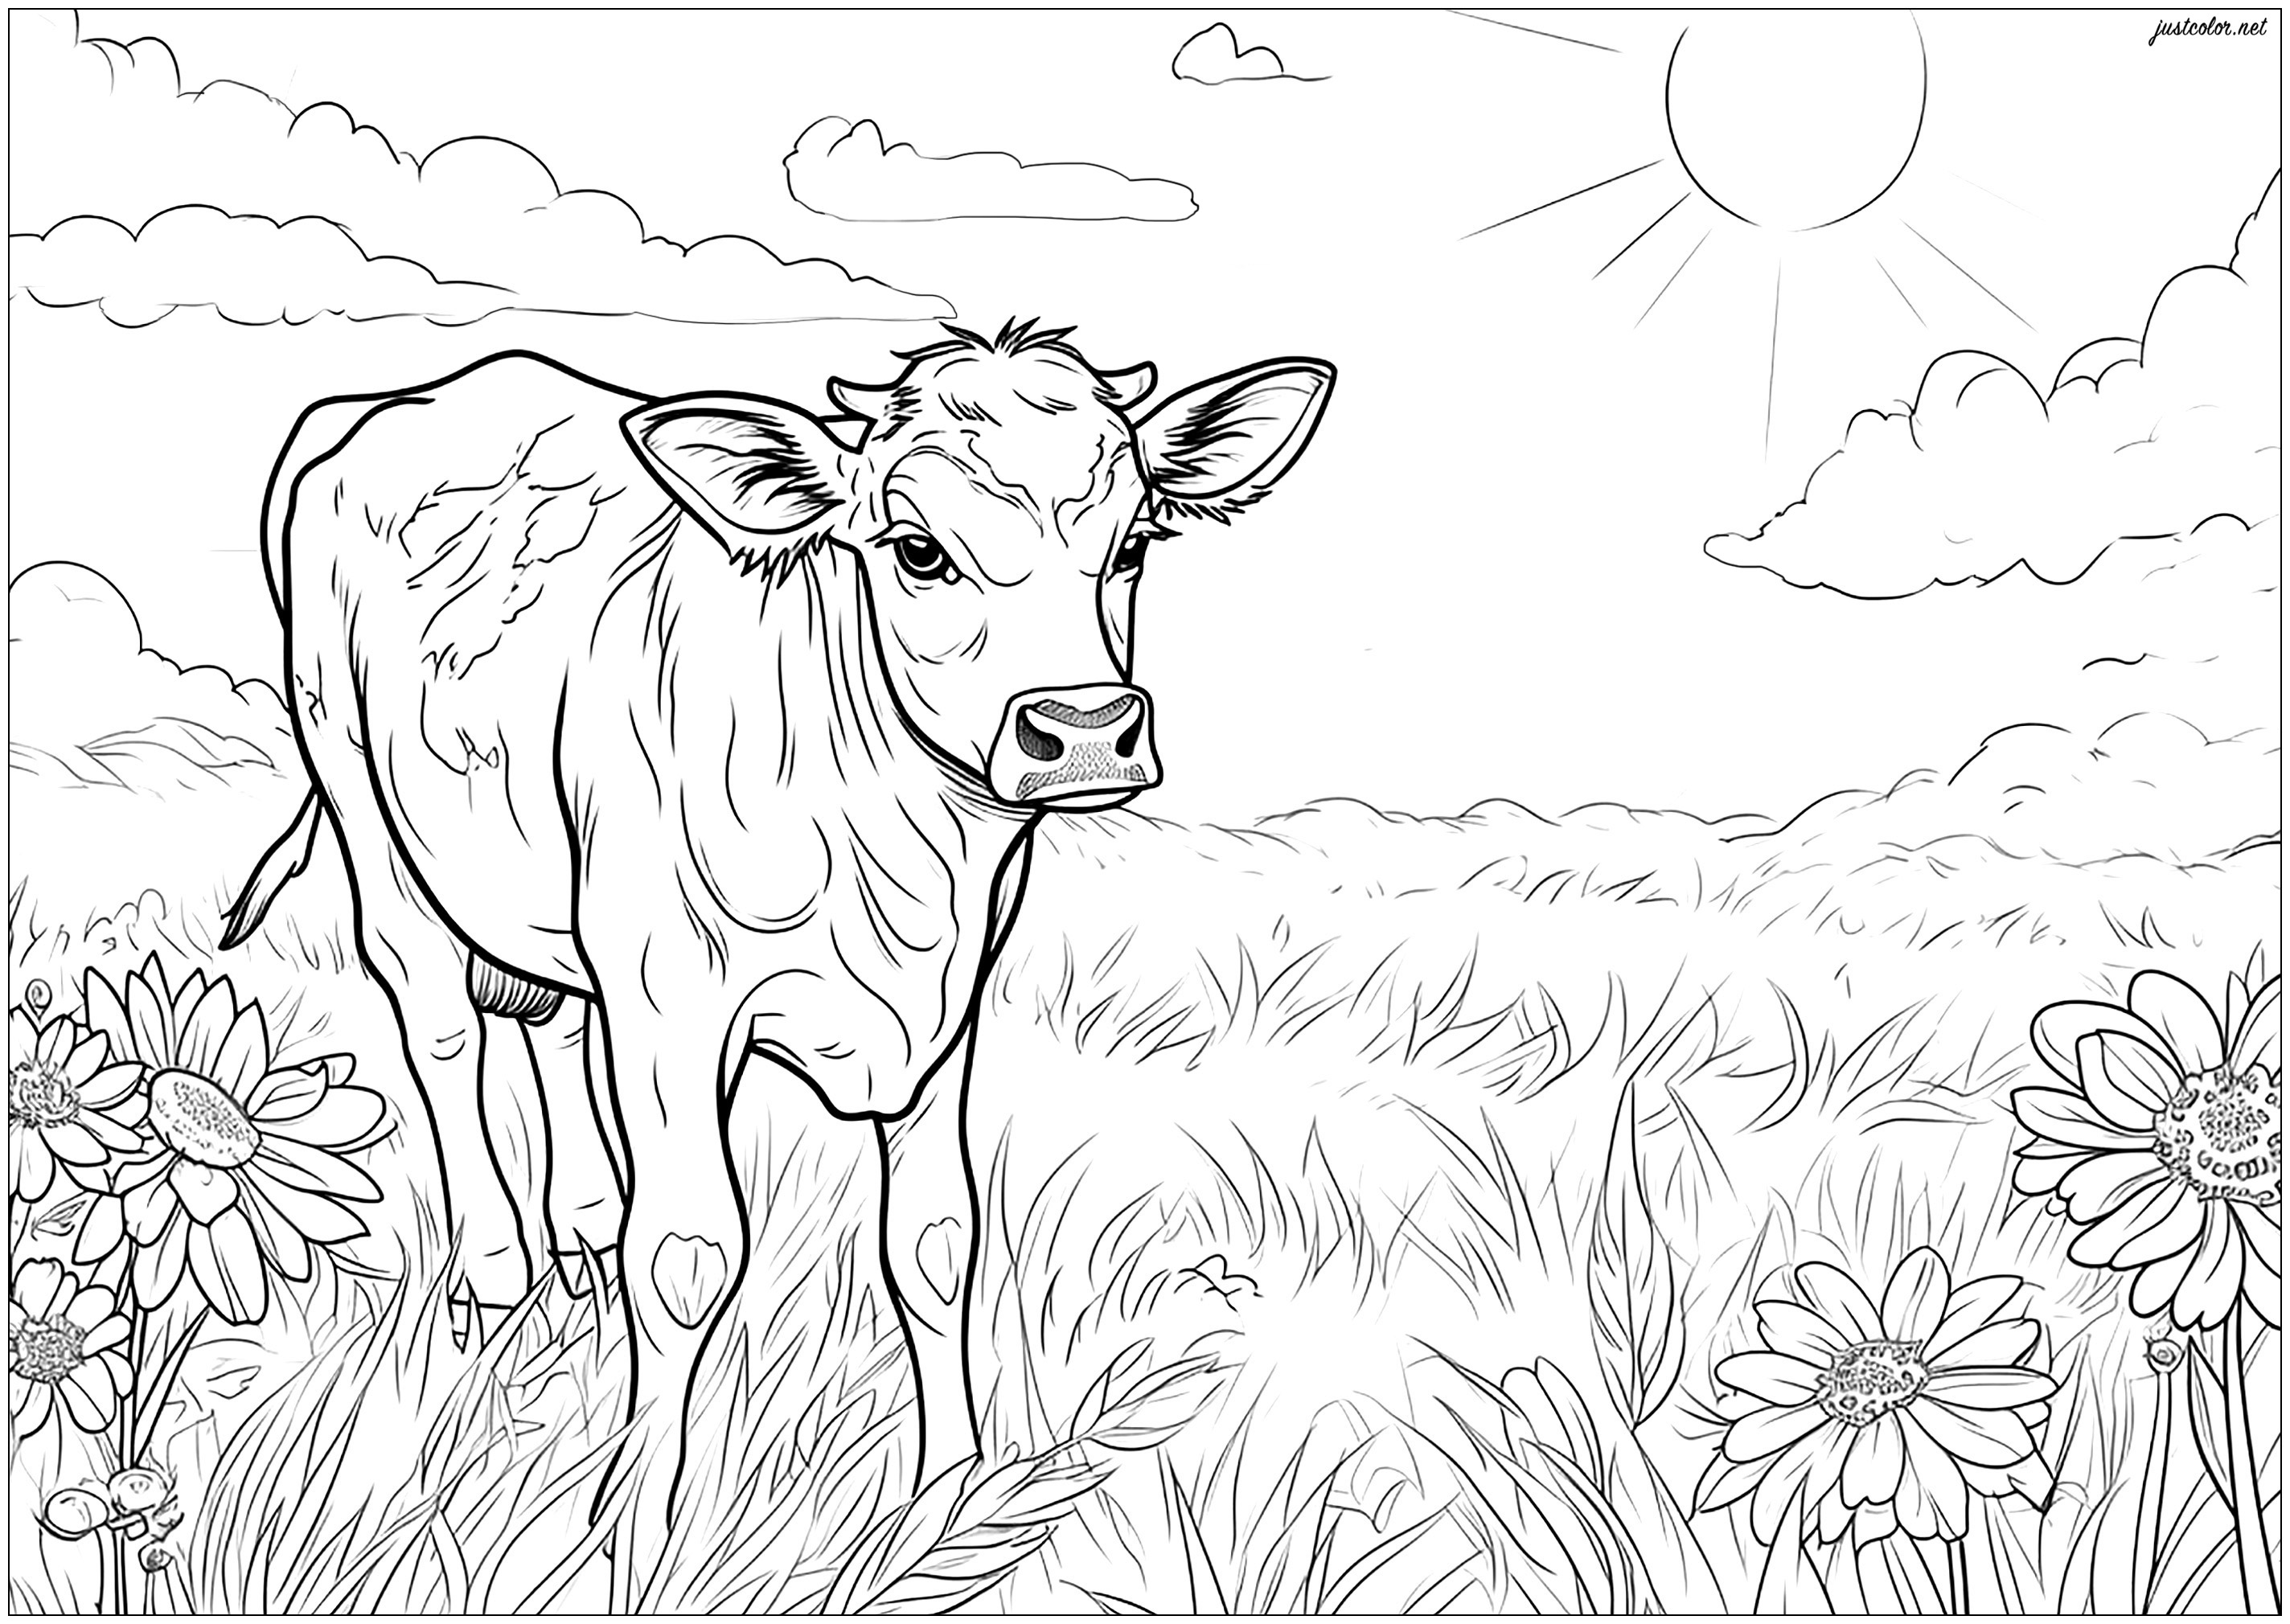 Cow in a field - 1 - Cows Adult Coloring Pages